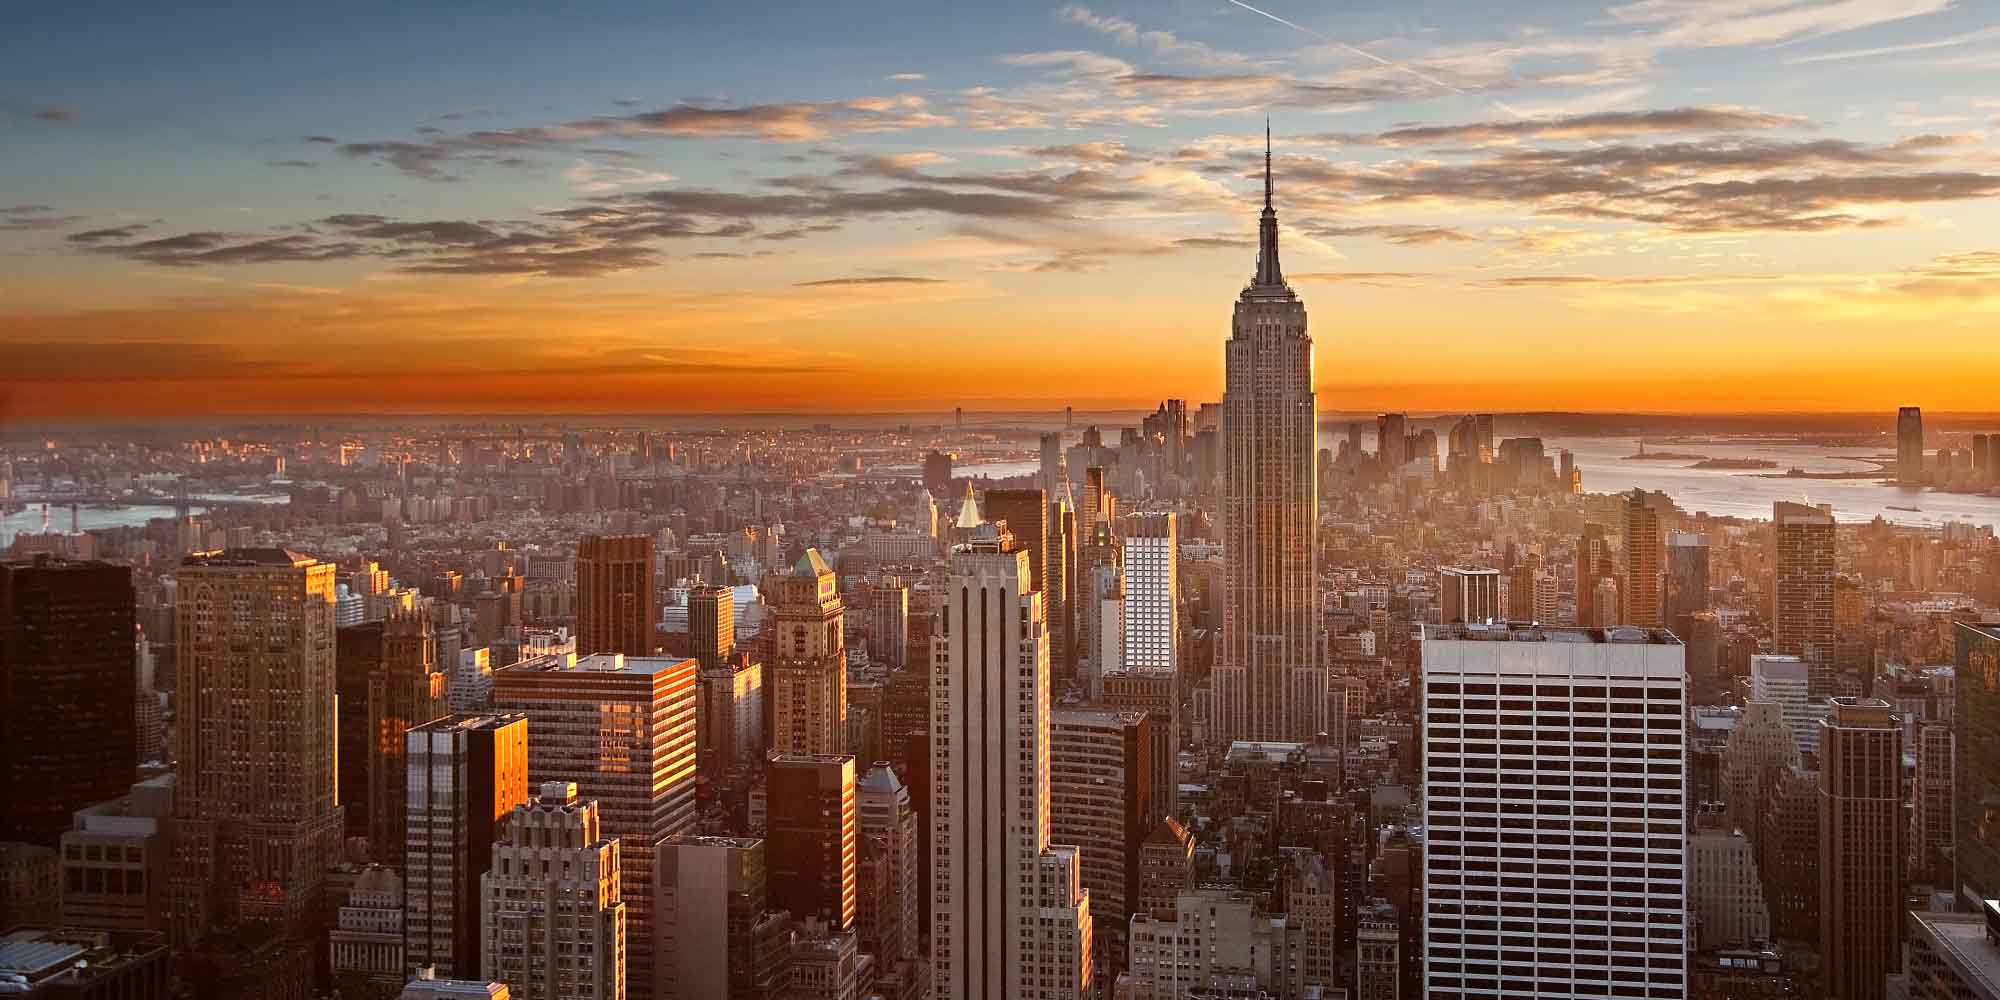 New York City Hd Wallpapers Free Download | New HD Wallpapers Download